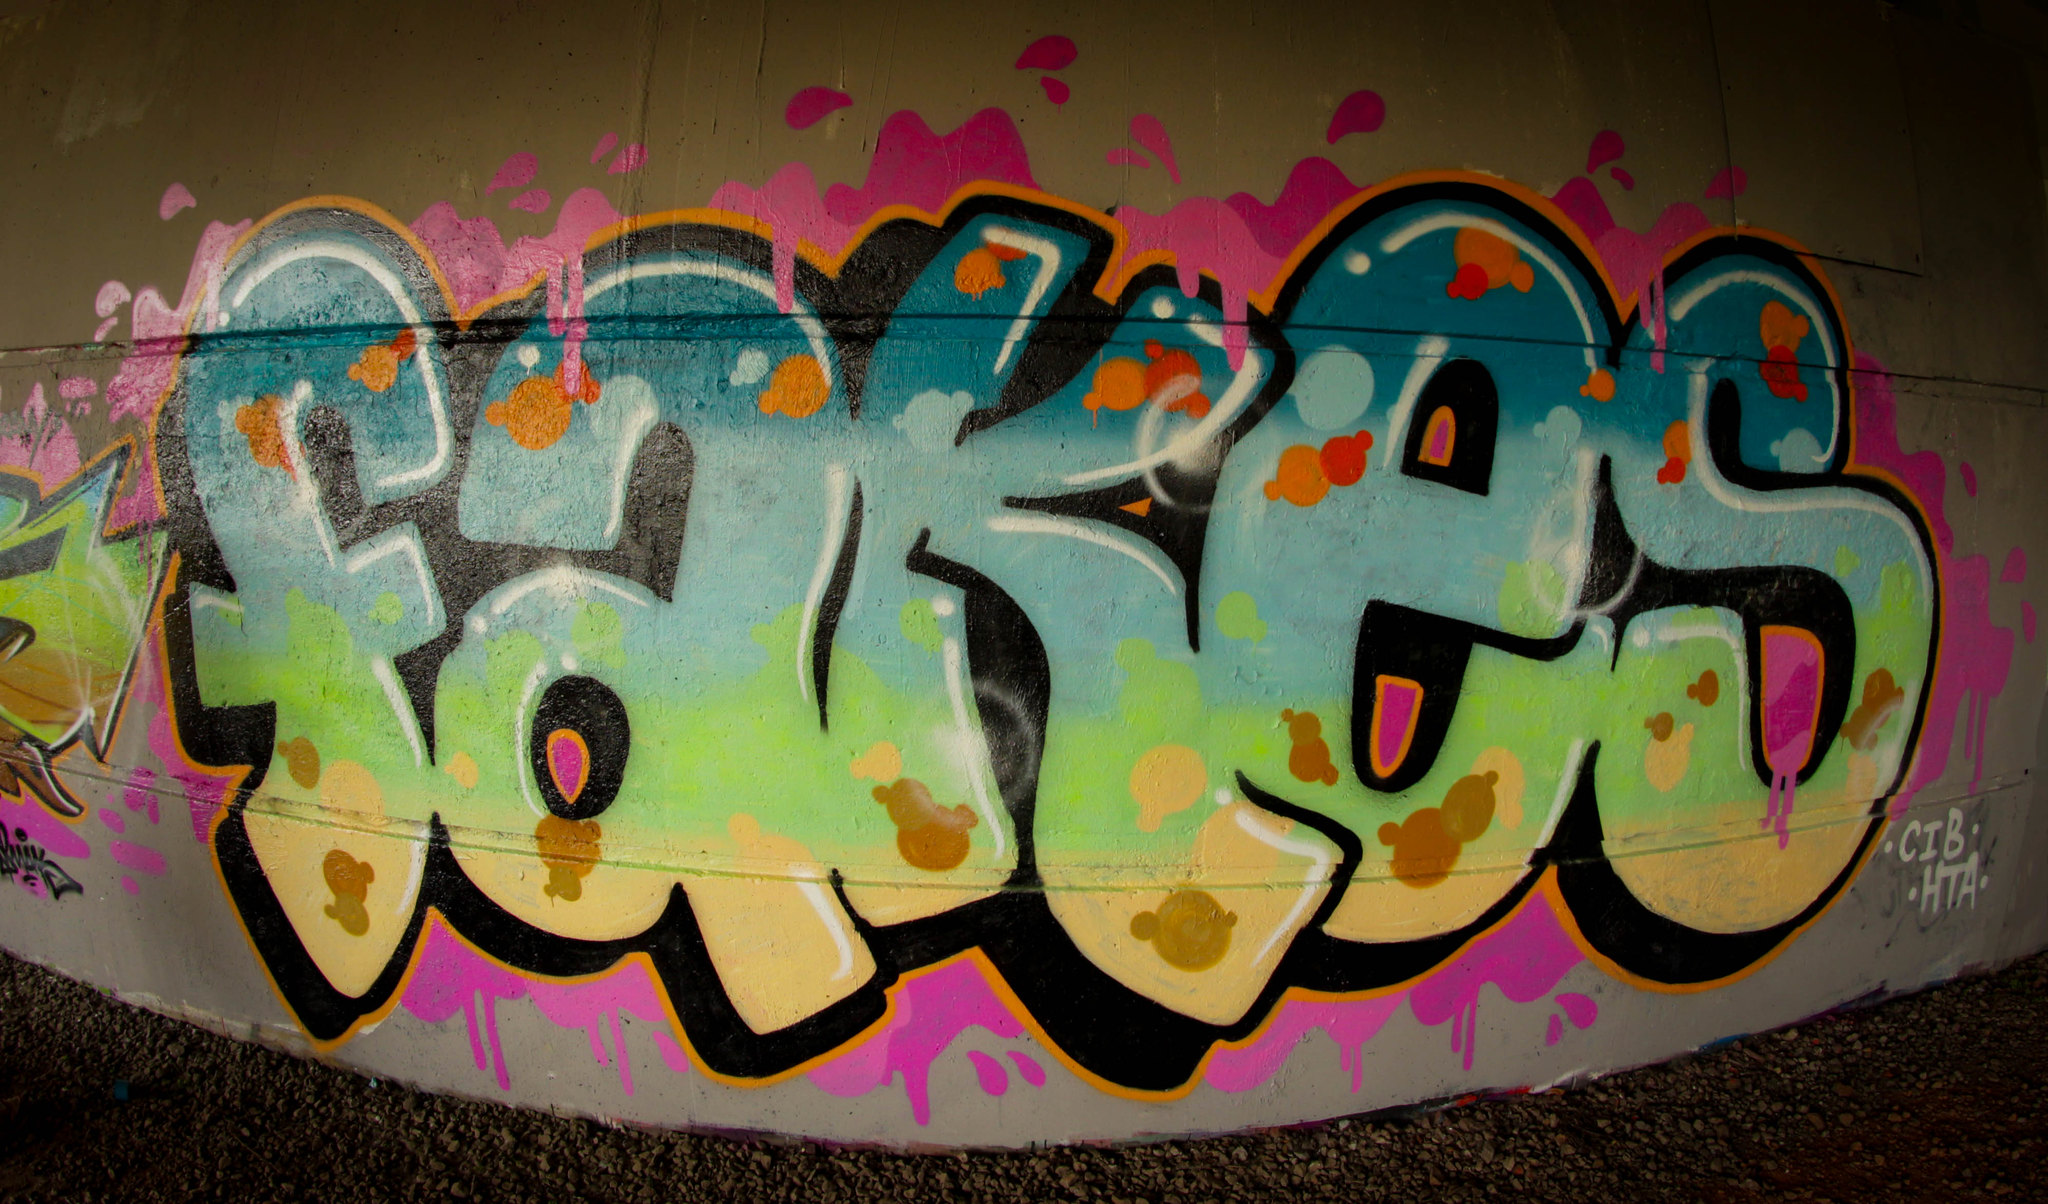 A graffiti image of the word "Fakes"